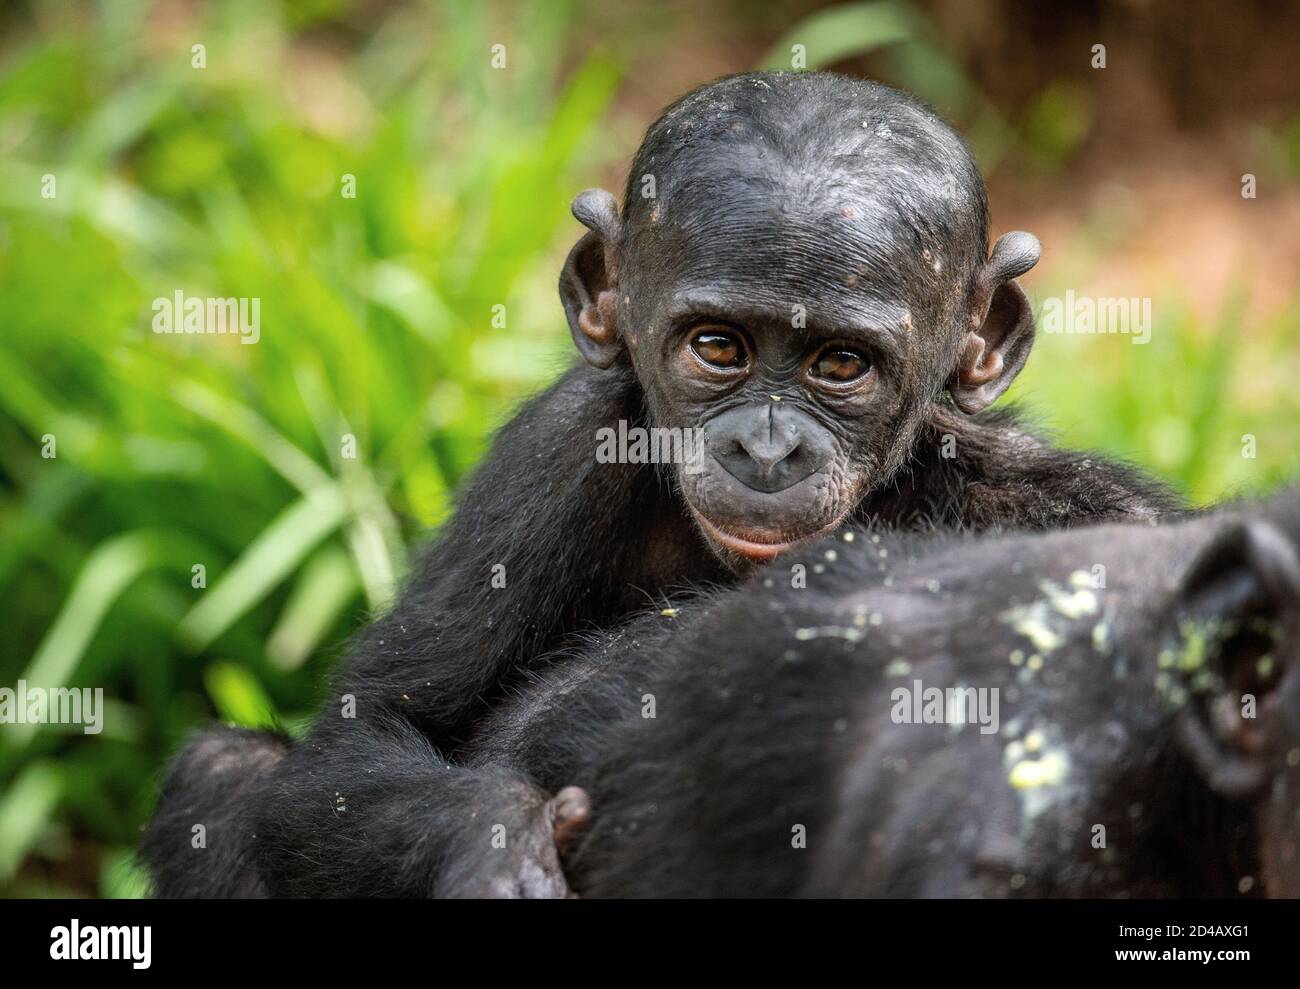 Bonobo Cub on the mother's back.  The Bonobo, Scientific name: Pan paniscus, earlier being called the pygmy chimpanzee. Democratic Republic of Congo. Stock Photo